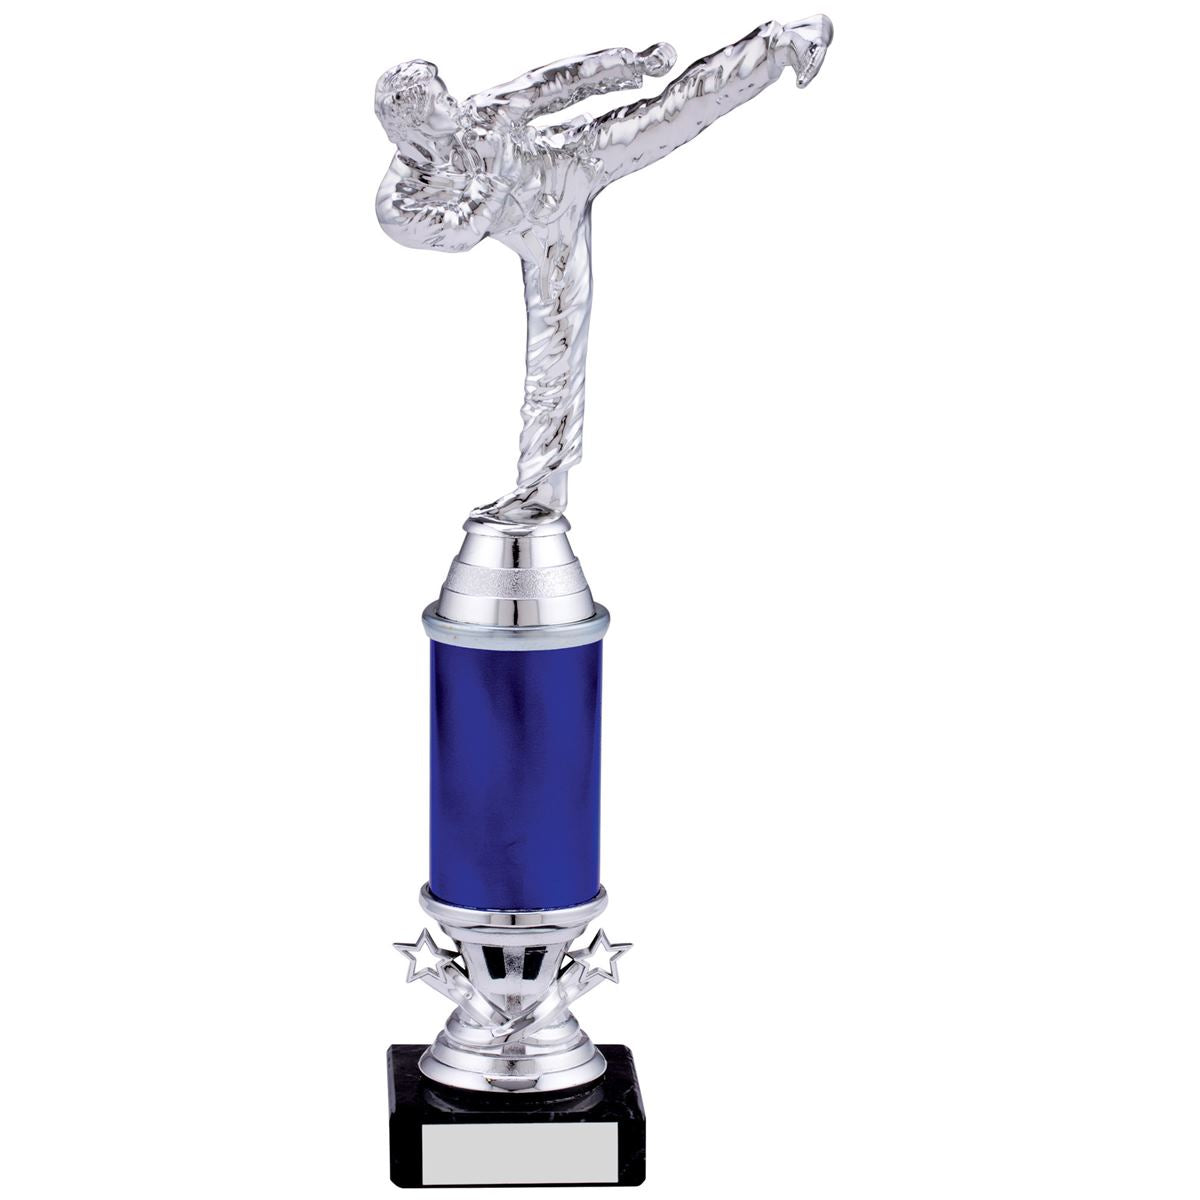 Karate Mini Tower Trophy Silver and Blue Tube Award